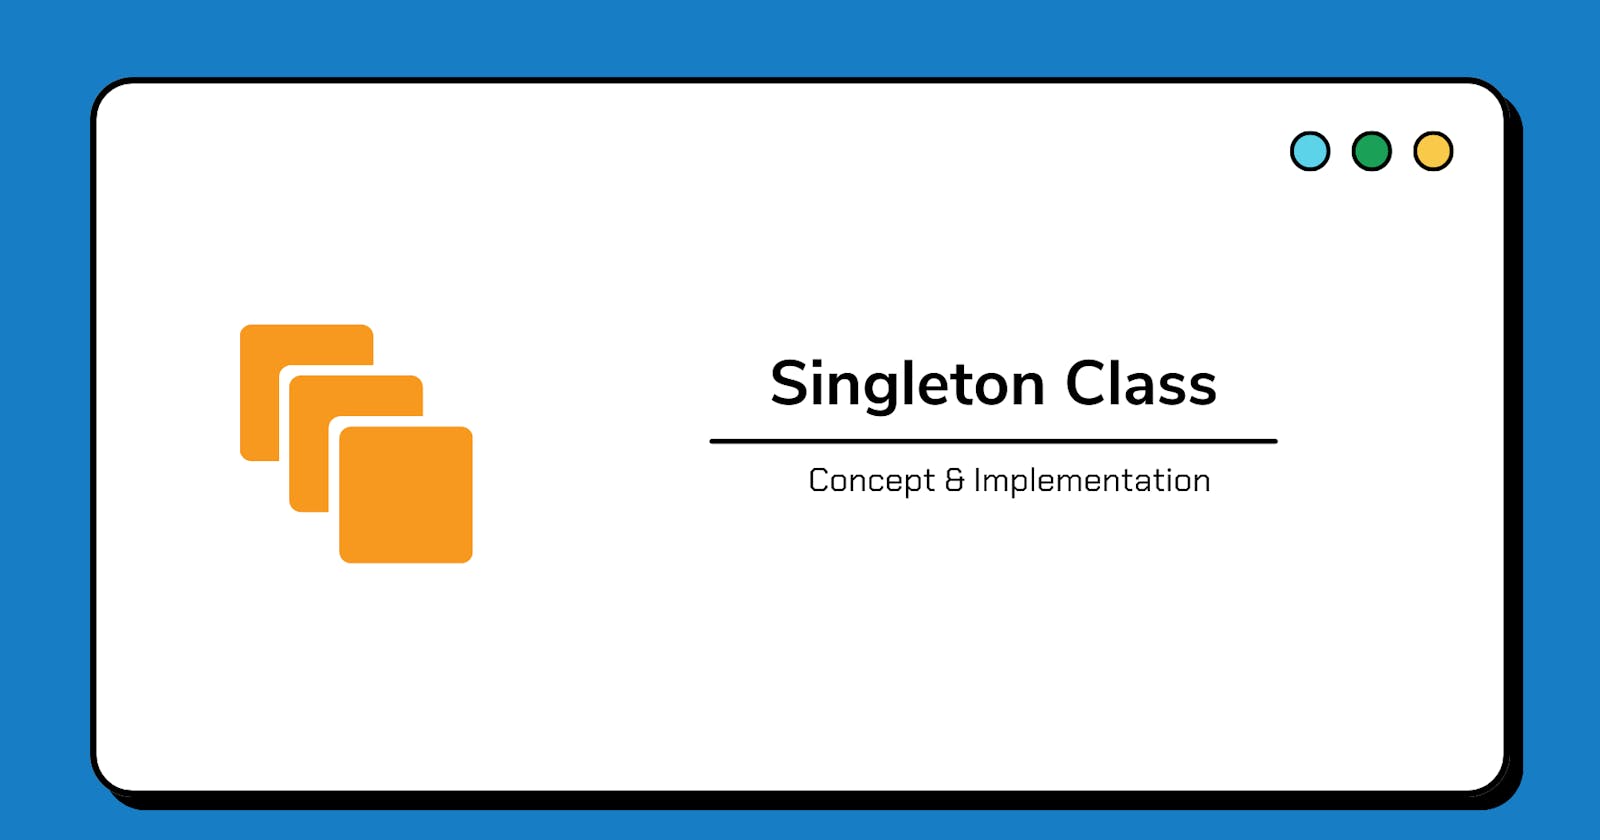 What are Singleton classes and Why do we need them?